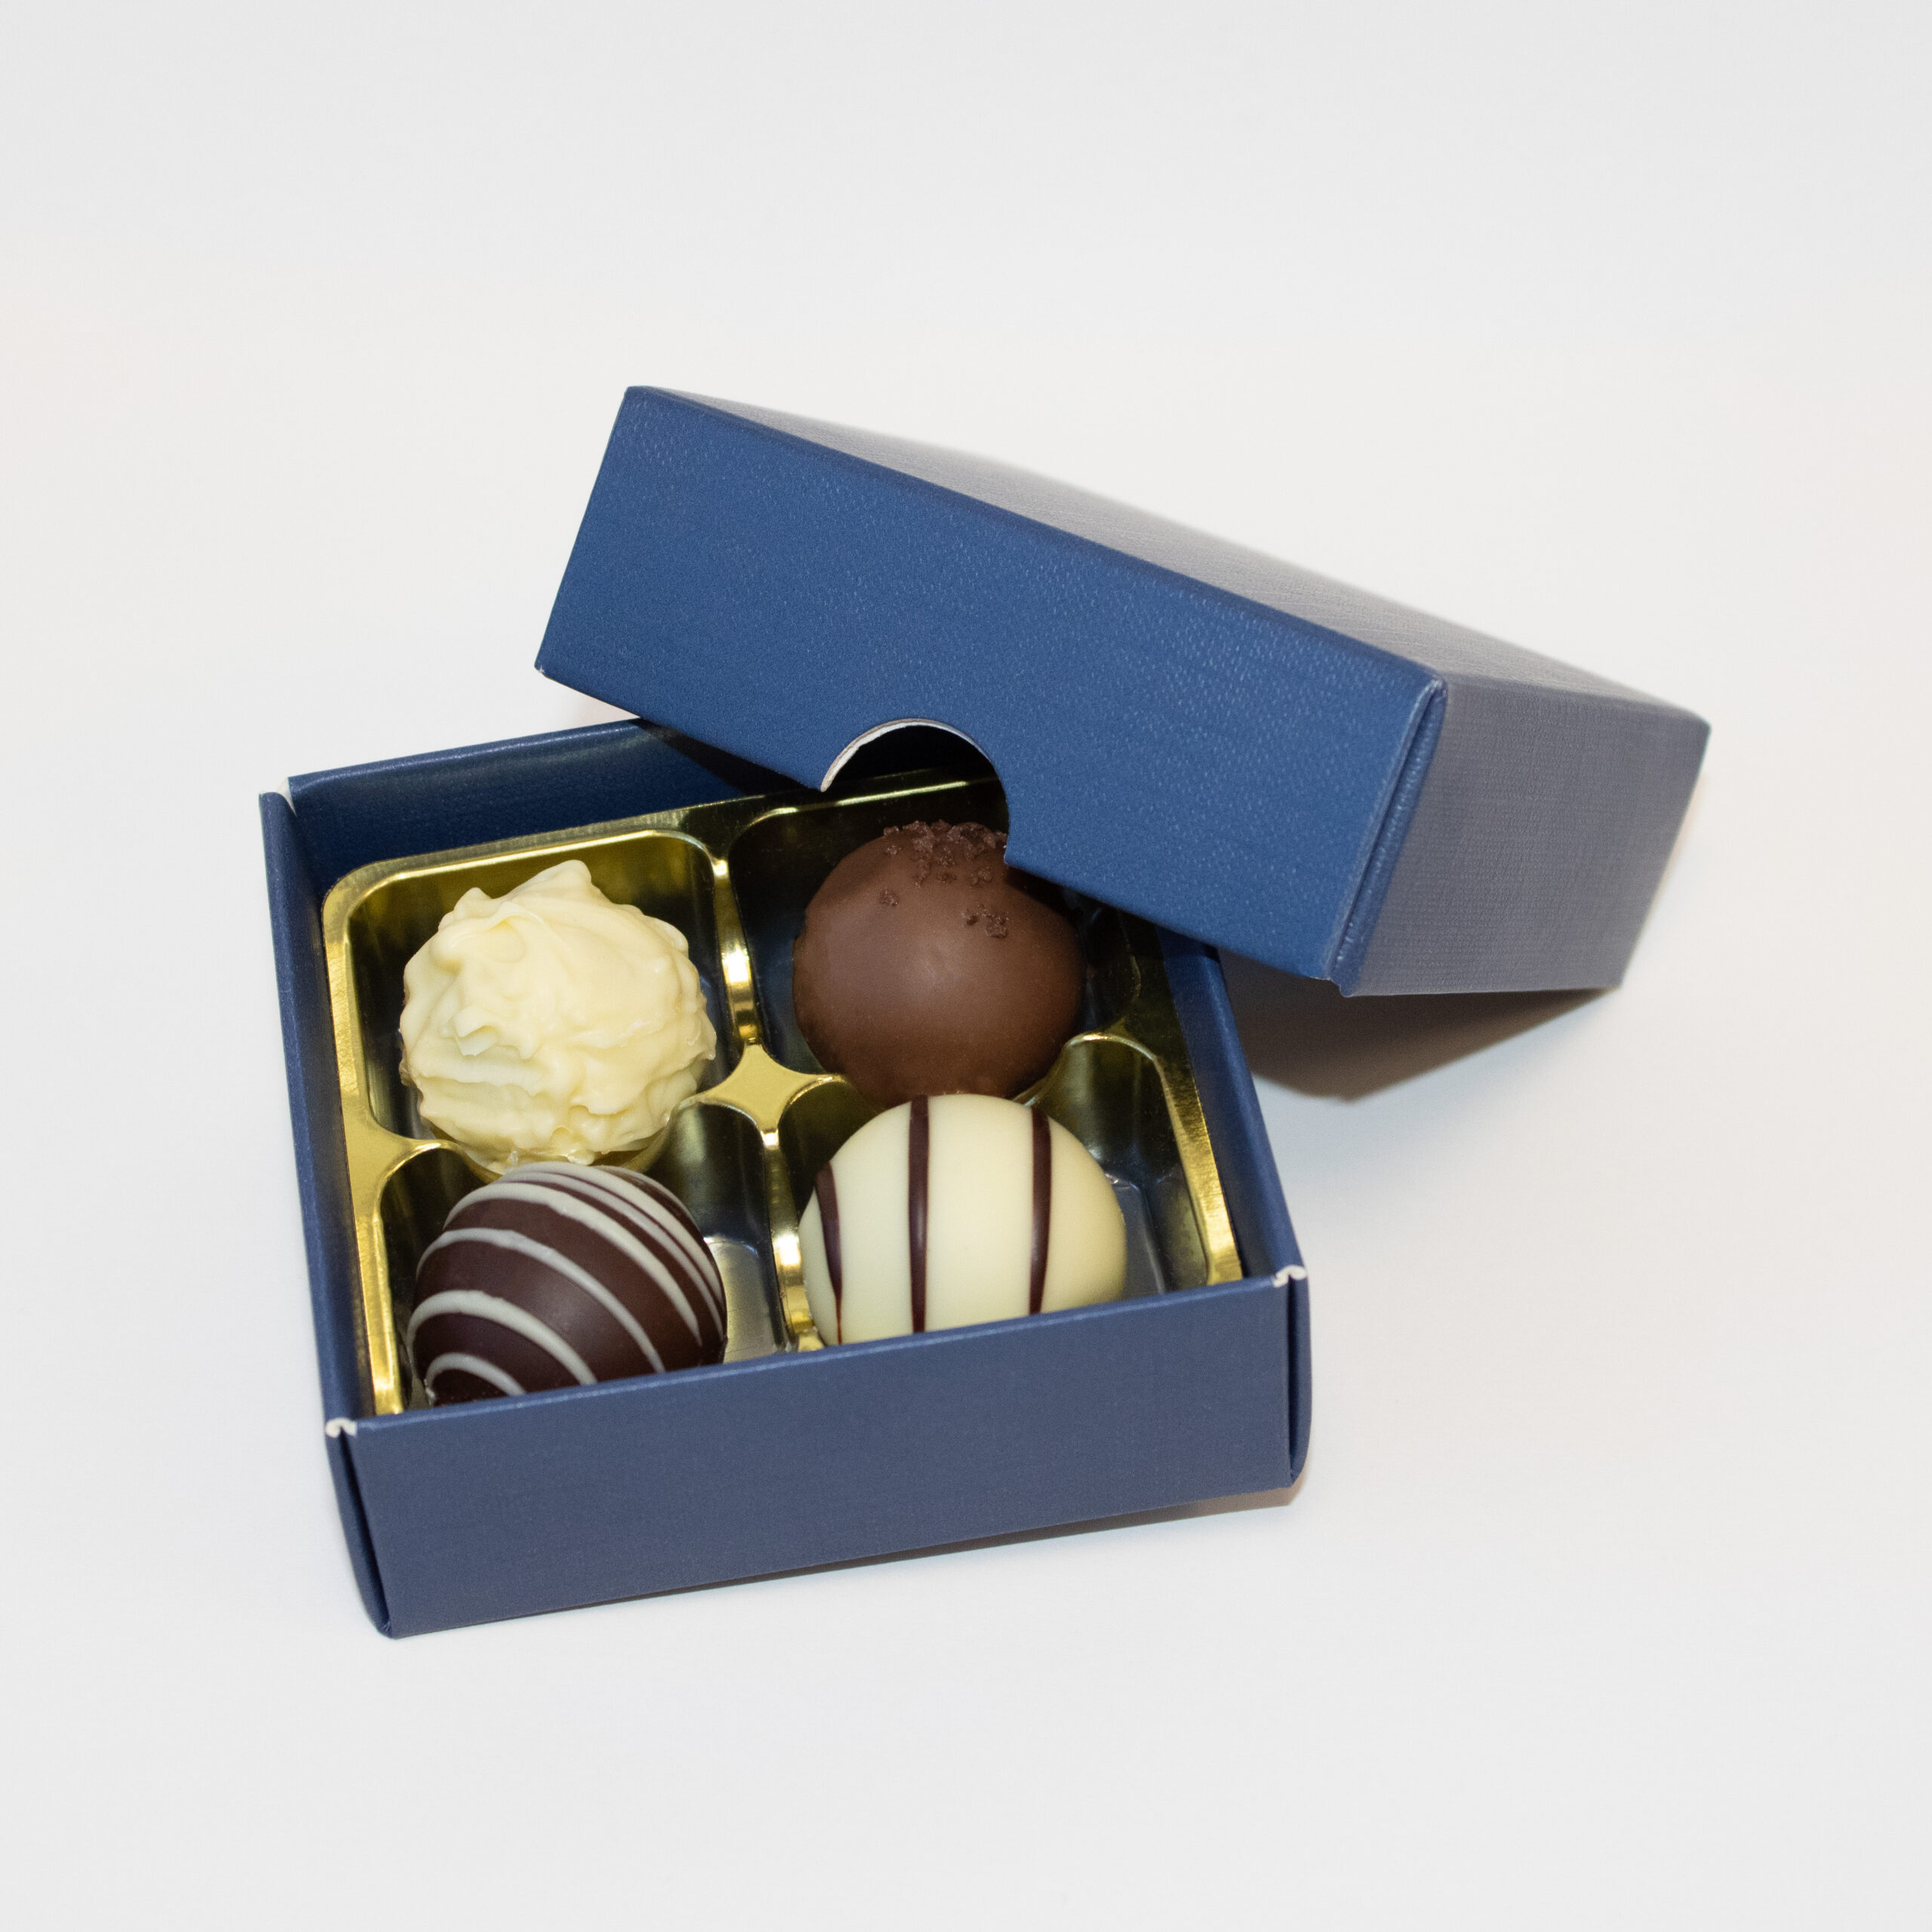 A 4 cavity Regal Blue Elegance fold-up base & lid with a bright gold vac-forme tray filled with chocolate truffles